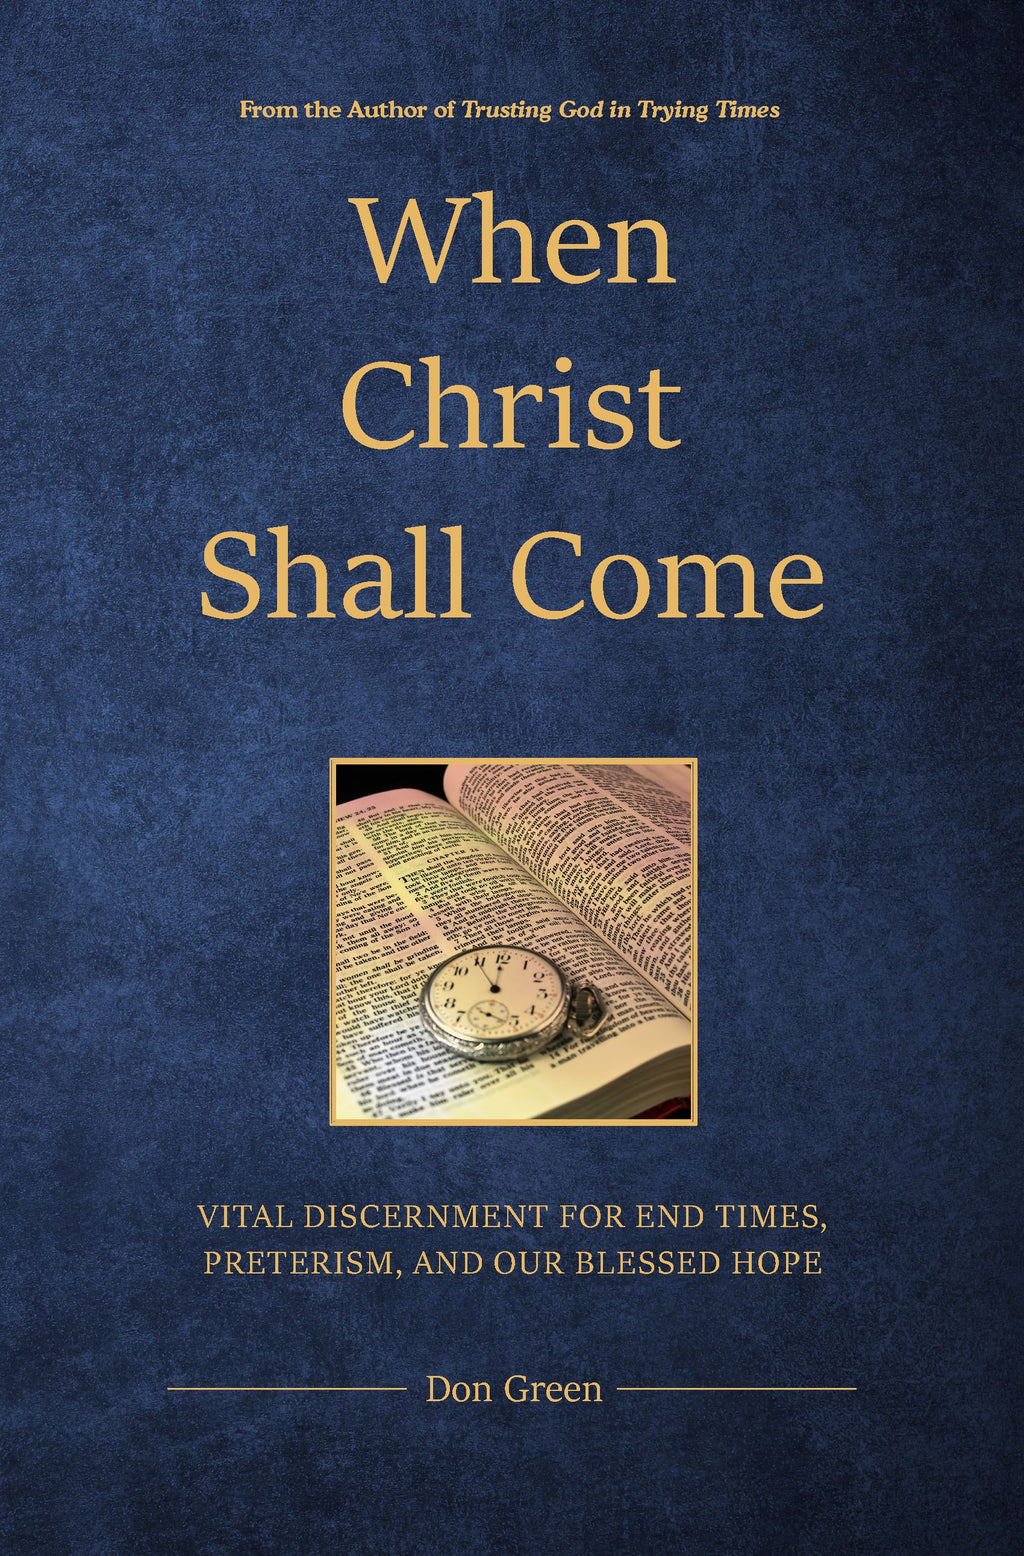 When Christ Shall Come